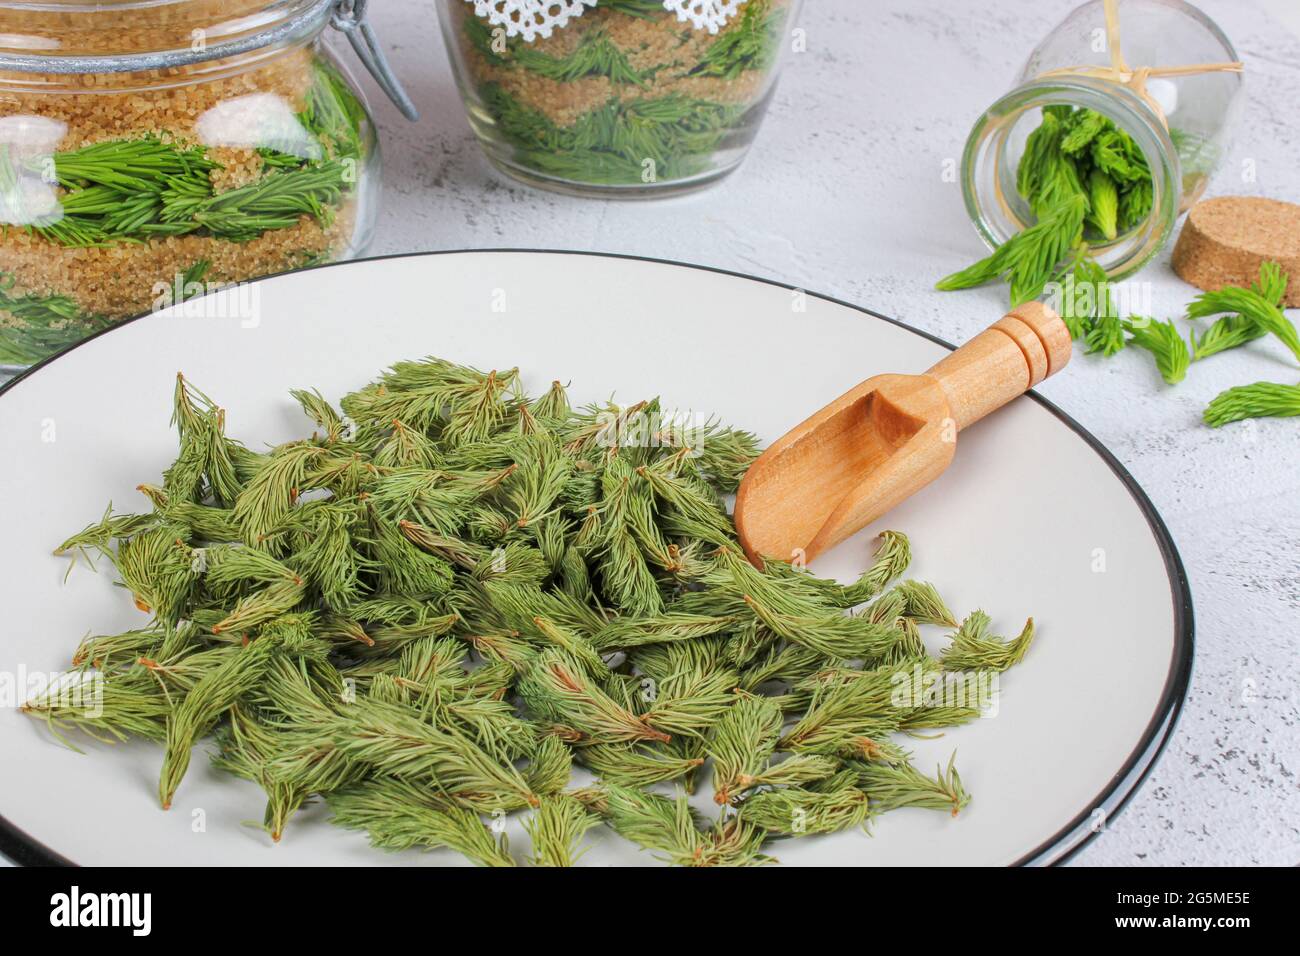 Young shoots of spruce prepare with brown sugar and dried shoots of spruce prepare for tea. Remedy for cough and asthma. Homeopathy and natural folk m Stock Photo